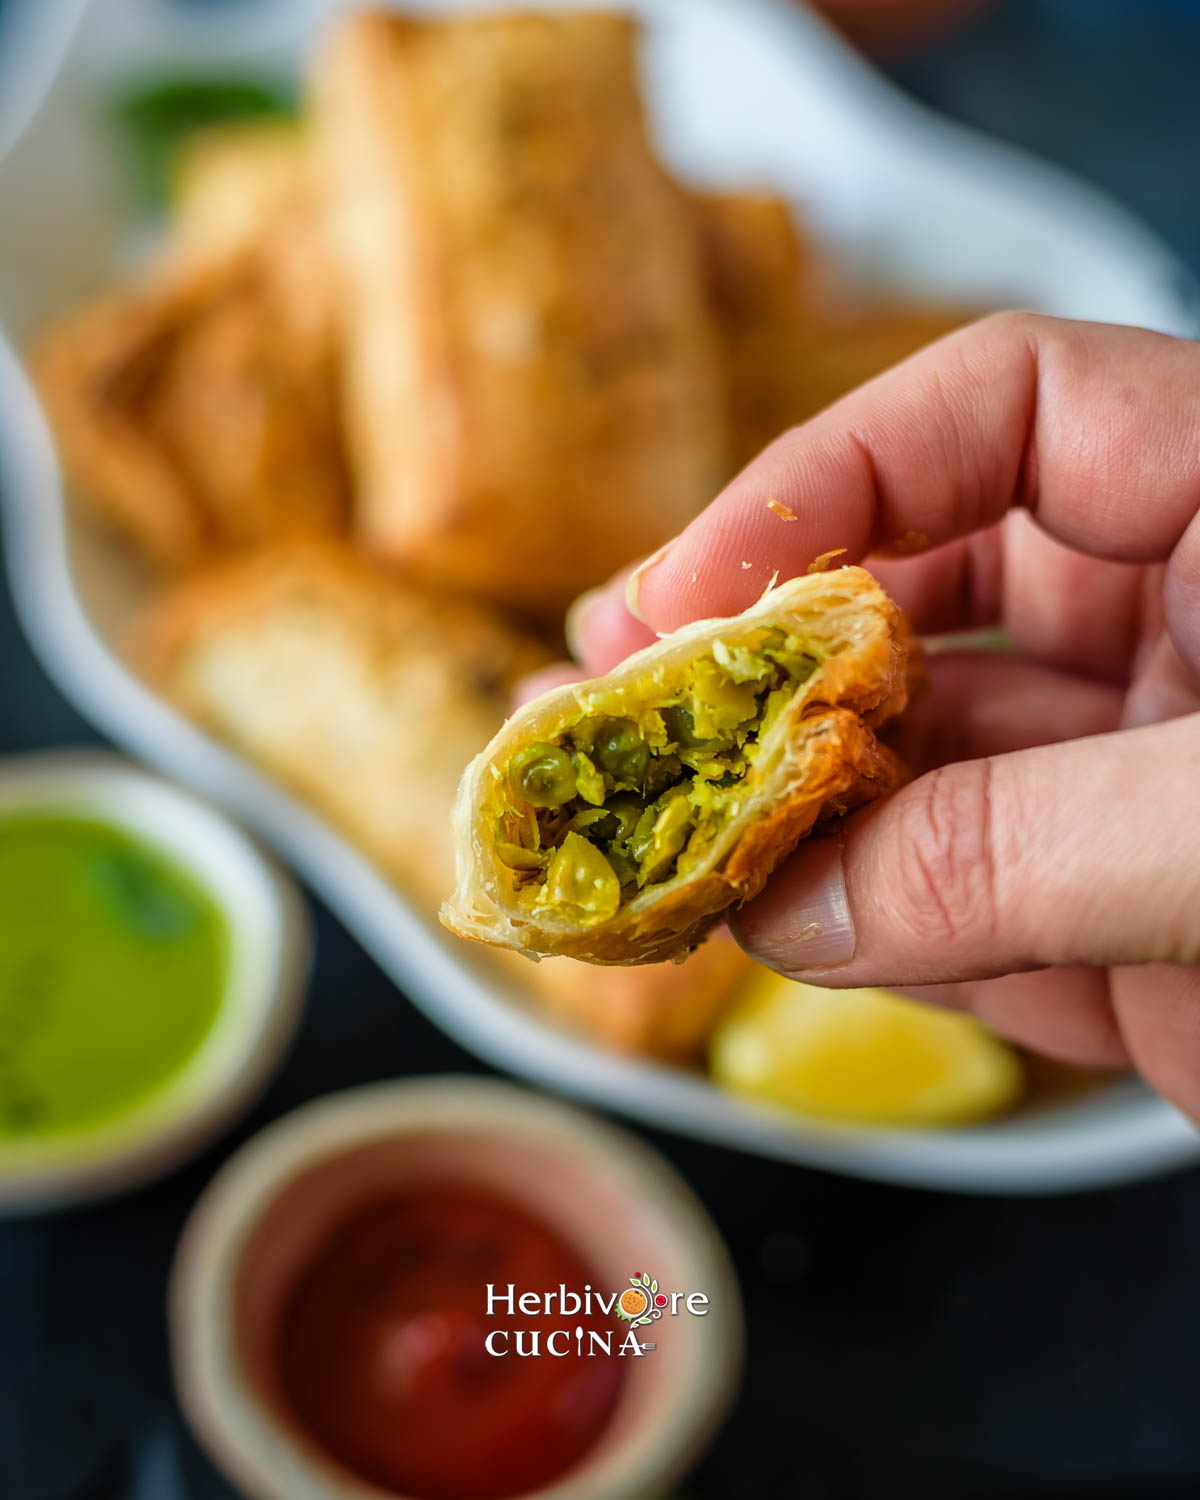 Holding a cut green peas kachori puff showing the filling and puff layers with some ketchup and chutney on the side. 